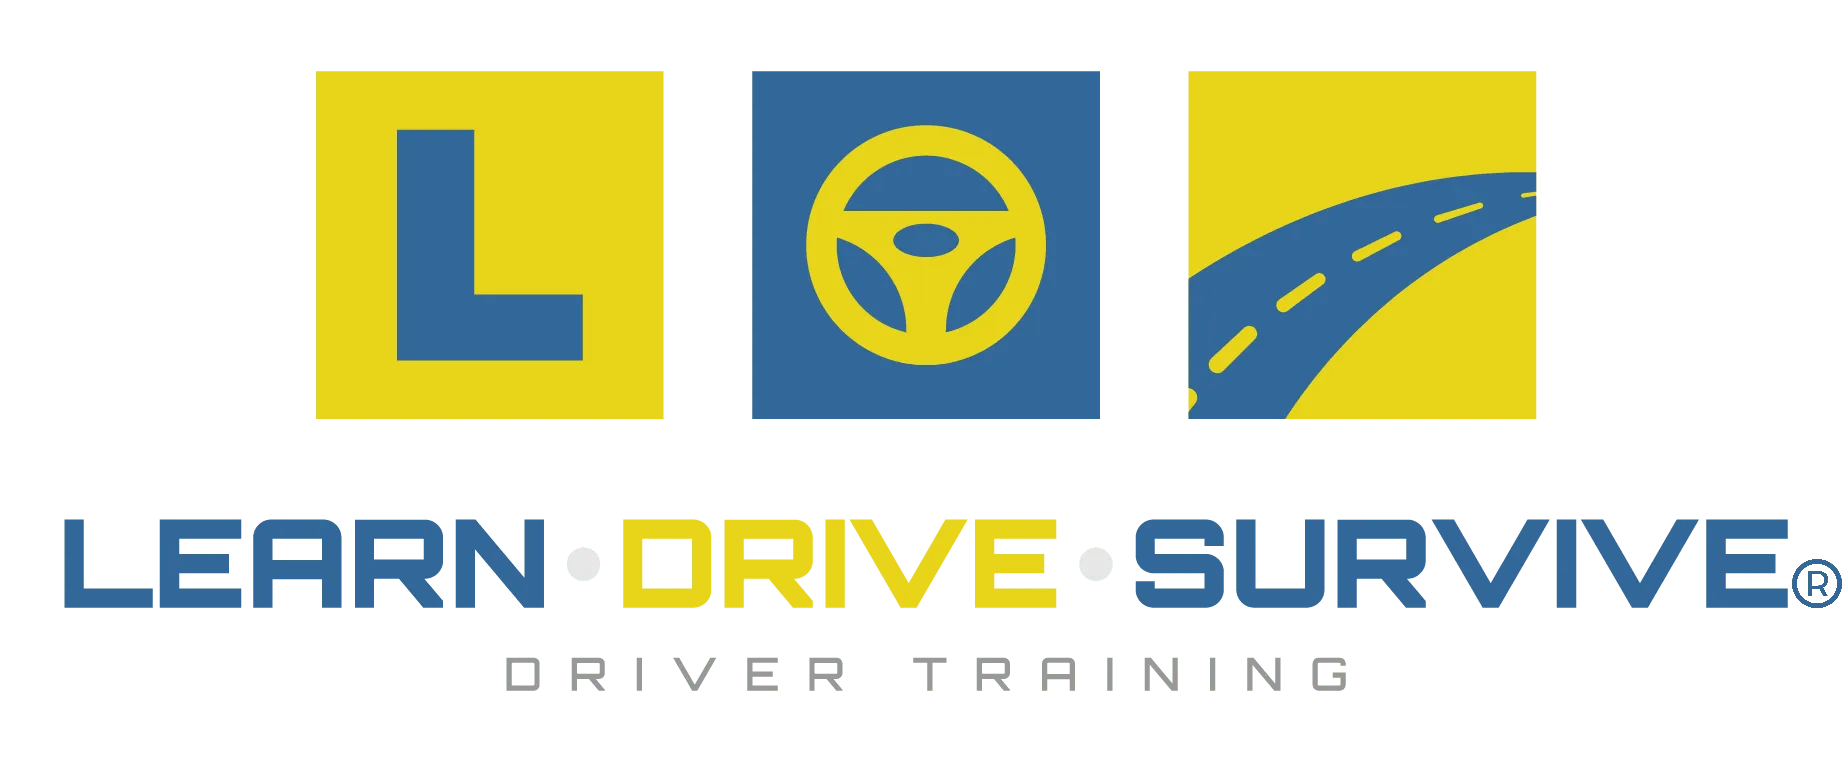 NSW Safer Drivers Course Learn Drive Survive